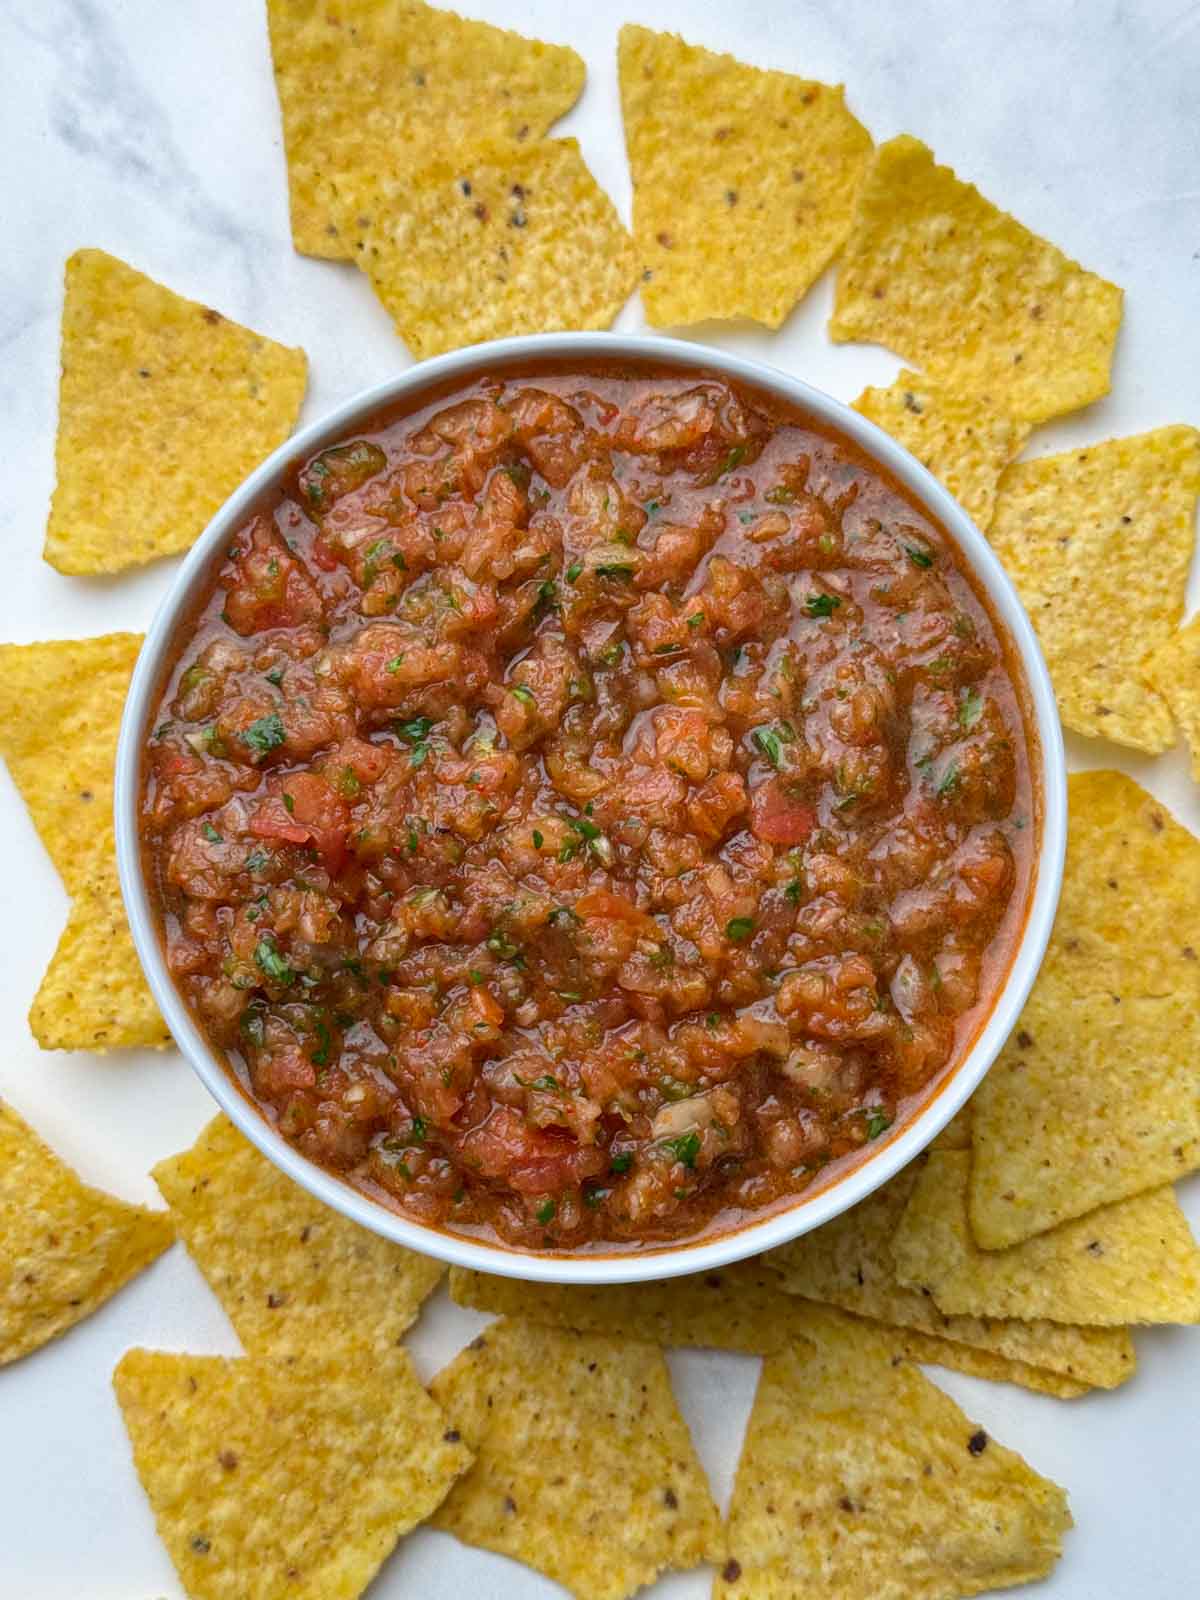 dip served in a bowl with tortilla chips on the side